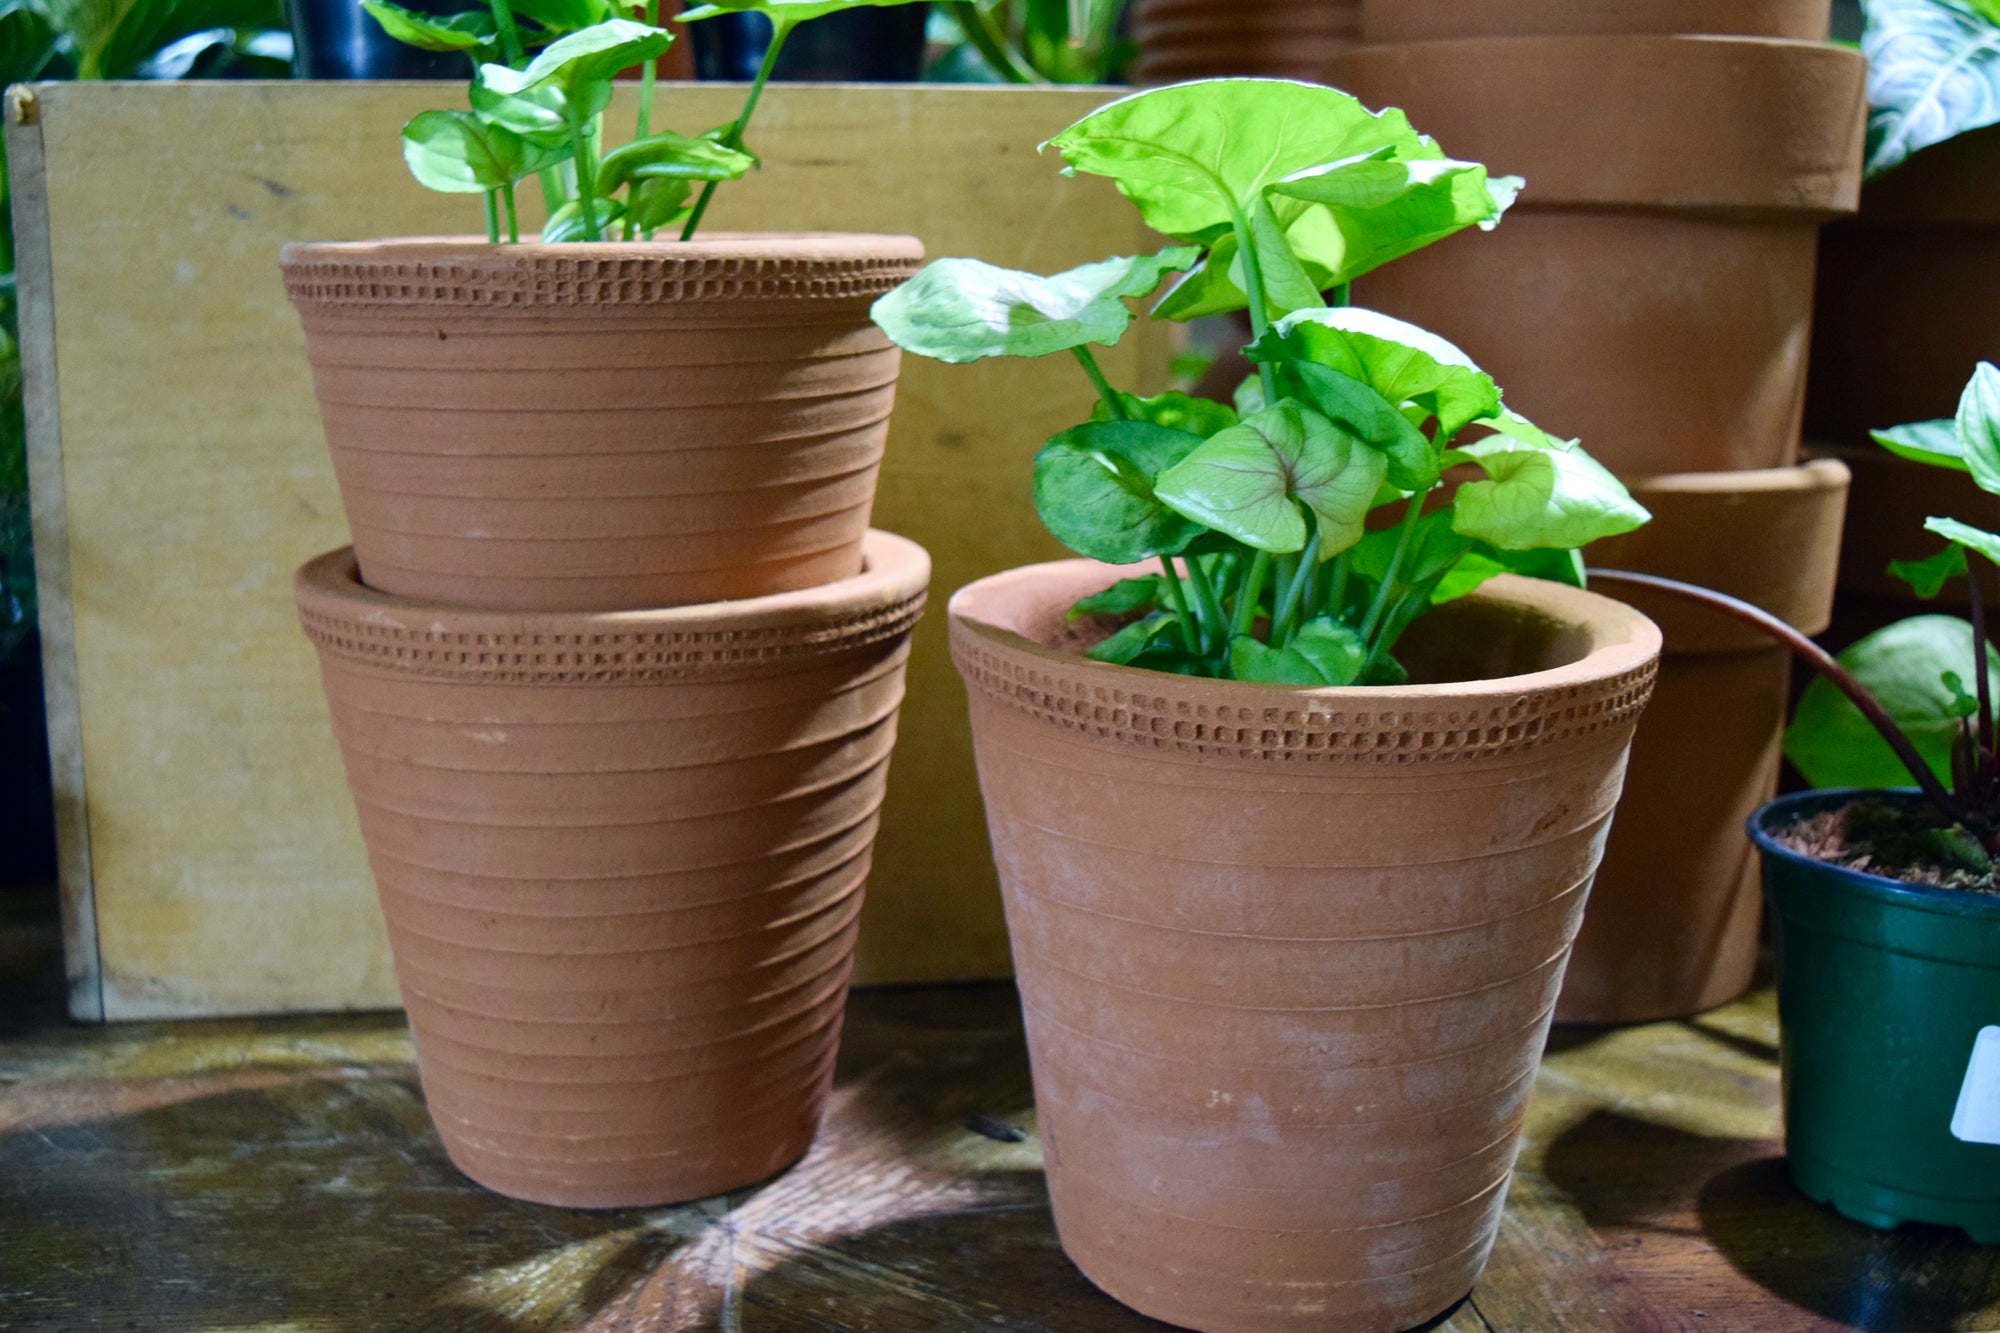 A stack of terracotta planters with a design etched into the clay. There are two green, leafy plants inside 2 planters.